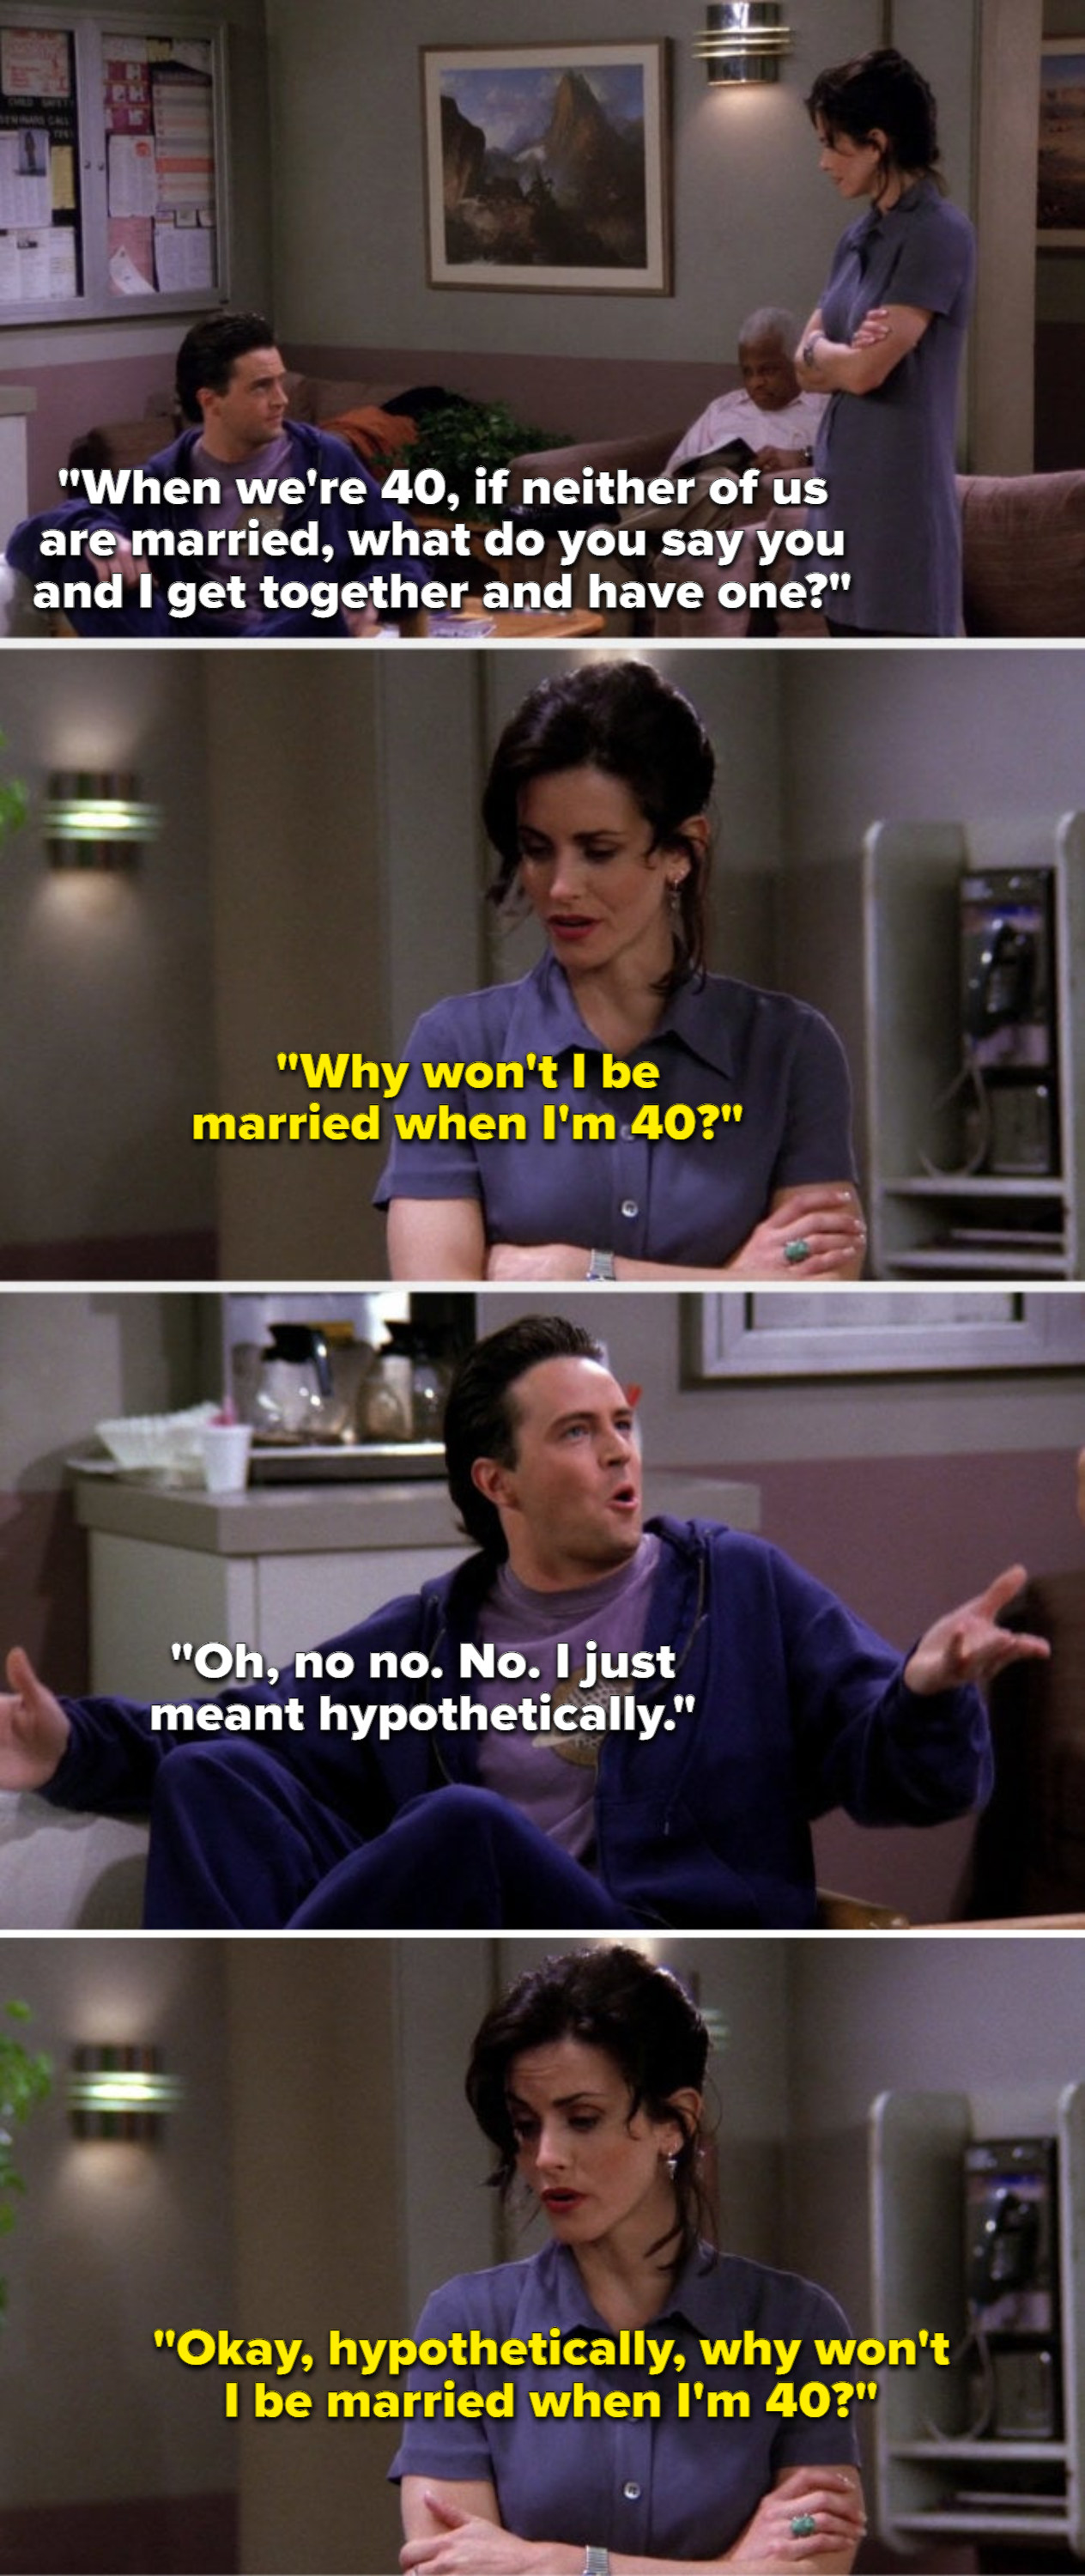 On Friends, Chandler says, &quot;When we&#x27;re 40, if neither of us are married, why don&#x27;t you and I have one?&quot; Monica: &quot;Why won&#x27;t I be married at 40?&quot; Chandler: &quot;No, I meant hypothetically,&quot; and Monica&quot; &quot;Okay, hypothetically, why won&#x27;t I be married at 40?&quot;